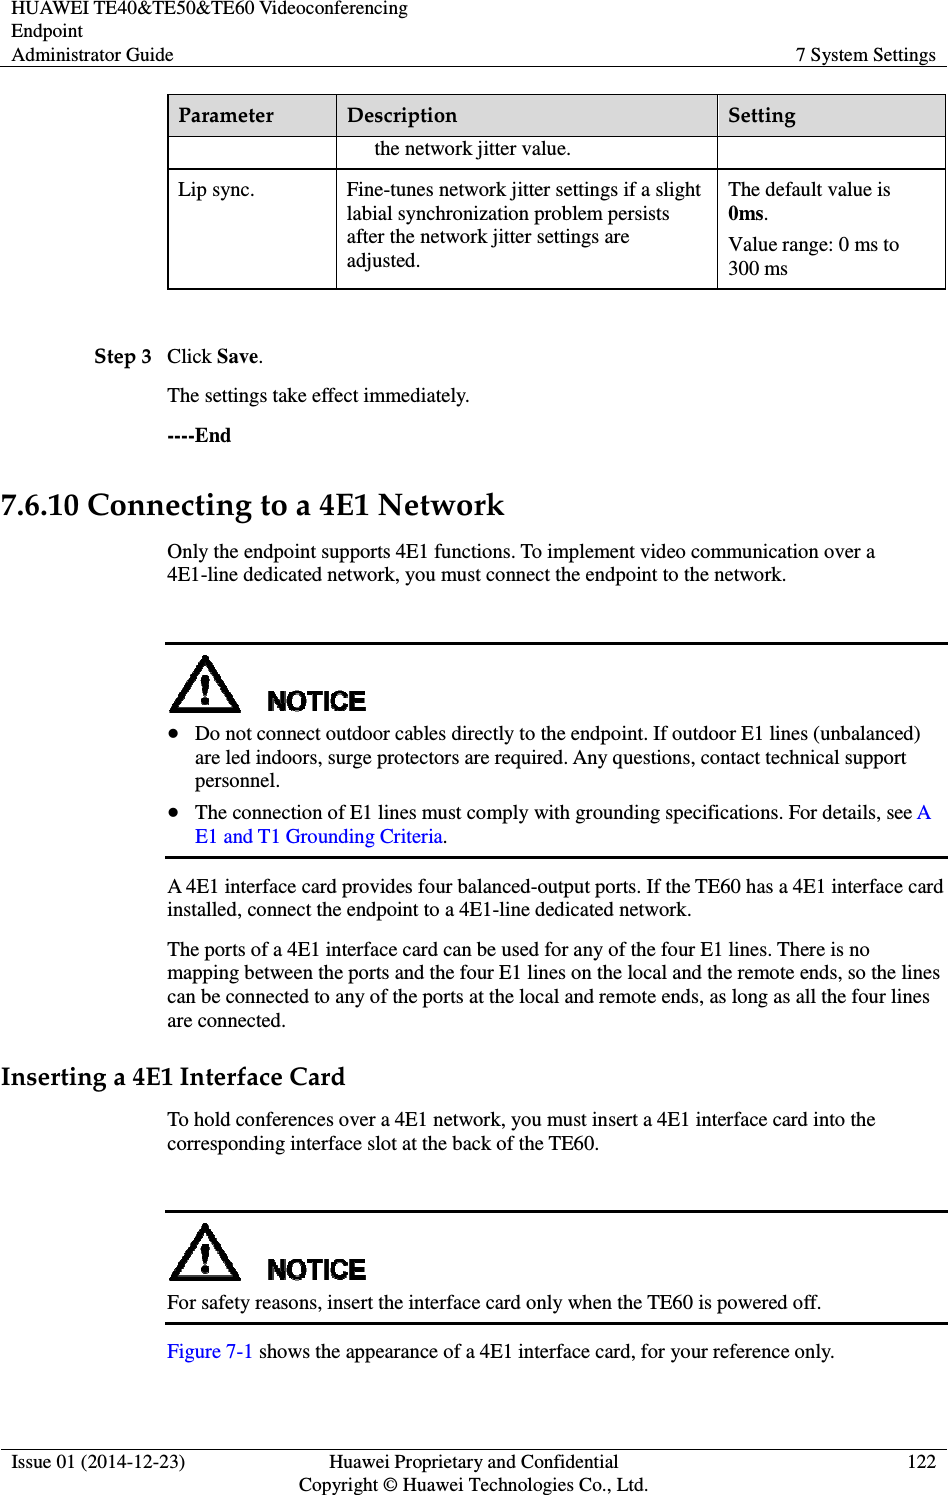 HUAWEI TE40&amp;TE50&amp;TE60 Videoconferencing Endpoint Administrator Guide  7 System Settings  Issue 01 (2014-12-23)  Huawei Proprietary and Confidential                                     Copyright © Huawei Technologies Co., Ltd. 122  Parameter  Description  Setting the network jitter value. Lip sync.  Fine-tunes network jitter settings if a slight labial synchronization problem persists after the network jitter settings are adjusted. The default value is 0ms. Value range: 0 ms to 300 ms  Step 3 Click Save. The settings take effect immediately.   ----End 7.6.10 Connecting to a 4E1 Network Only the endpoint supports 4E1 functions. To implement video communication over a 4E1-line dedicated network, you must connect the endpoint to the network.    Do not connect outdoor cables directly to the endpoint. If outdoor E1 lines (unbalanced) are led indoors, surge protectors are required. Any questions, contact technical support personnel.  The connection of E1 lines must comply with grounding specifications. For details, see A E1 and T1 Grounding Criteria. A 4E1 interface card provides four balanced-output ports. If the TE60 has a 4E1 interface card installed, connect the endpoint to a 4E1-line dedicated network. The ports of a 4E1 interface card can be used for any of the four E1 lines. There is no mapping between the ports and the four E1 lines on the local and the remote ends, so the lines can be connected to any of the ports at the local and remote ends, as long as all the four lines are connected. Inserting a 4E1 Interface Card To hold conferences over a 4E1 network, you must insert a 4E1 interface card into the corresponding interface slot at the back of the TE60.   For safety reasons, insert the interface card only when the TE60 is powered off. Figure 7-1 shows the appearance of a 4E1 interface card, for your reference only. 